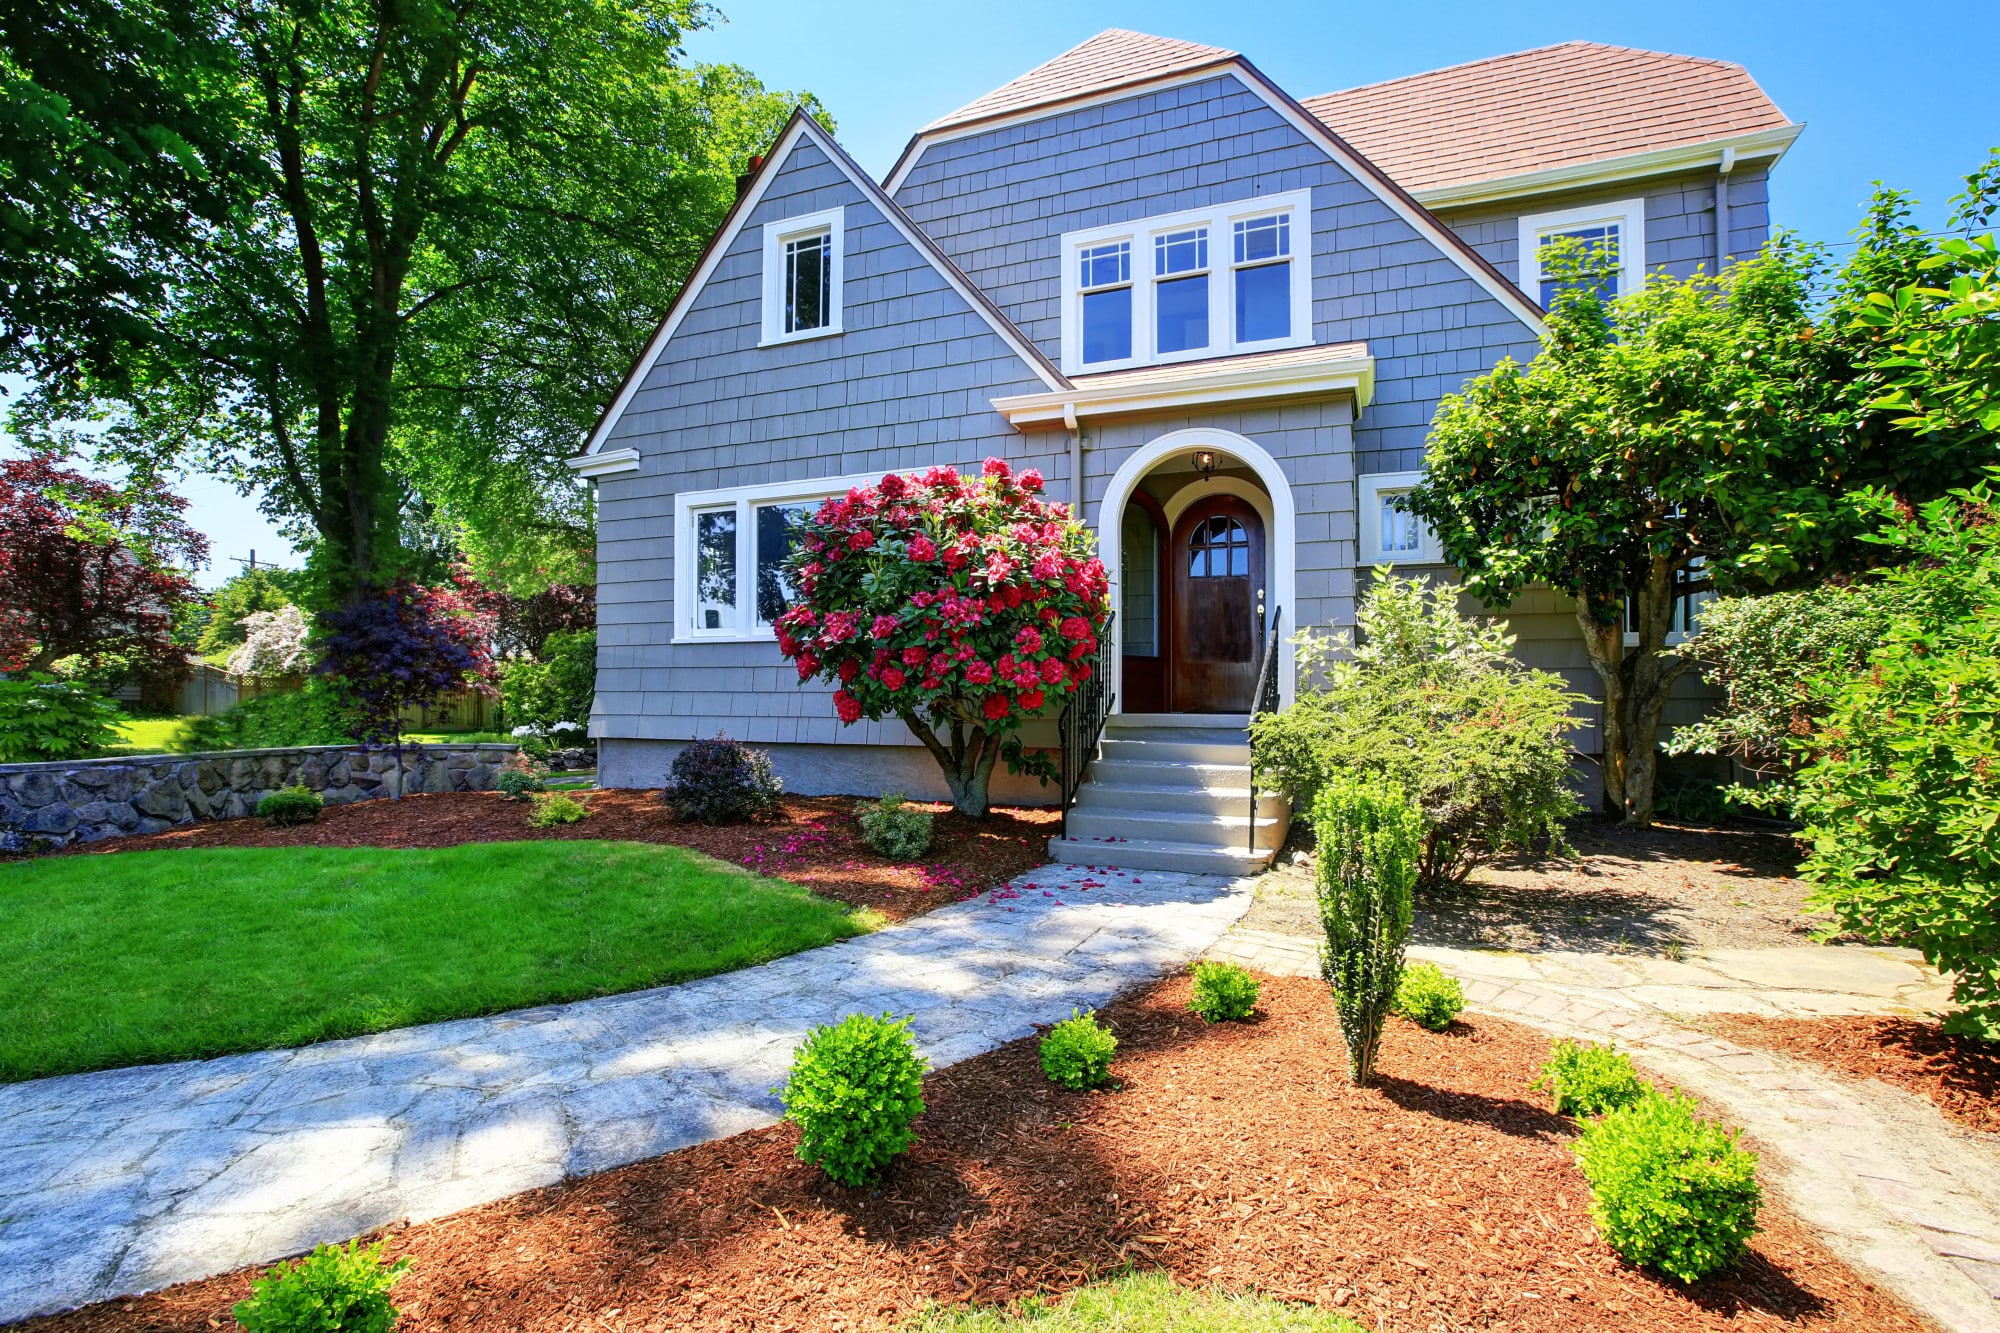 How to Add Curb Appeal to Your Rental Property